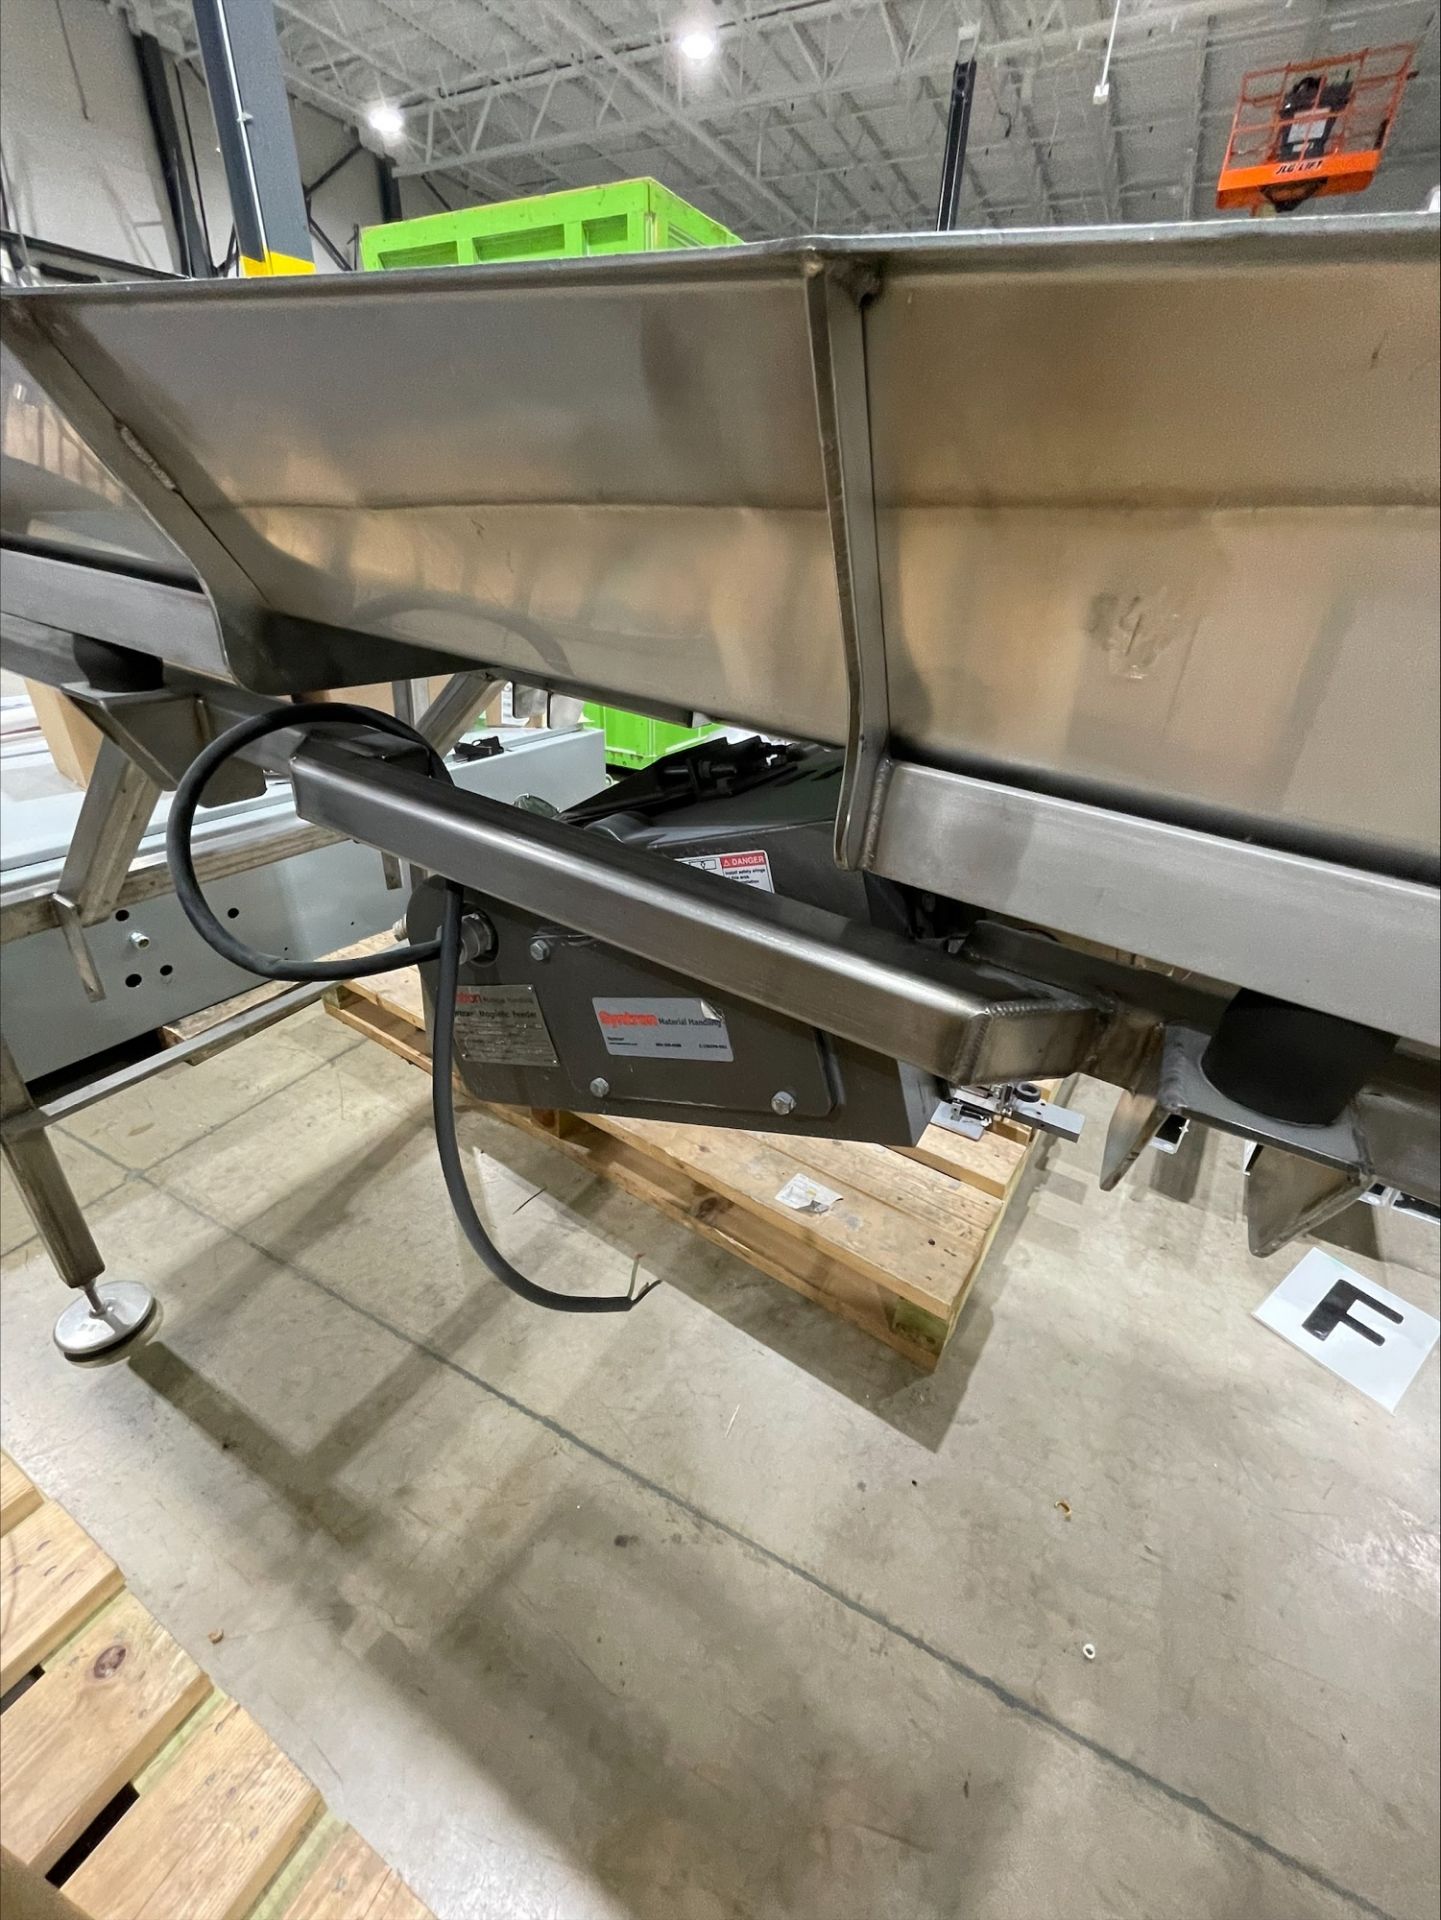 Syntron Stainless Steel Vibratory Feeding Conveyor,Model#FH24-C, serial#T106497 order#T222905, 445 - Image 2 of 6